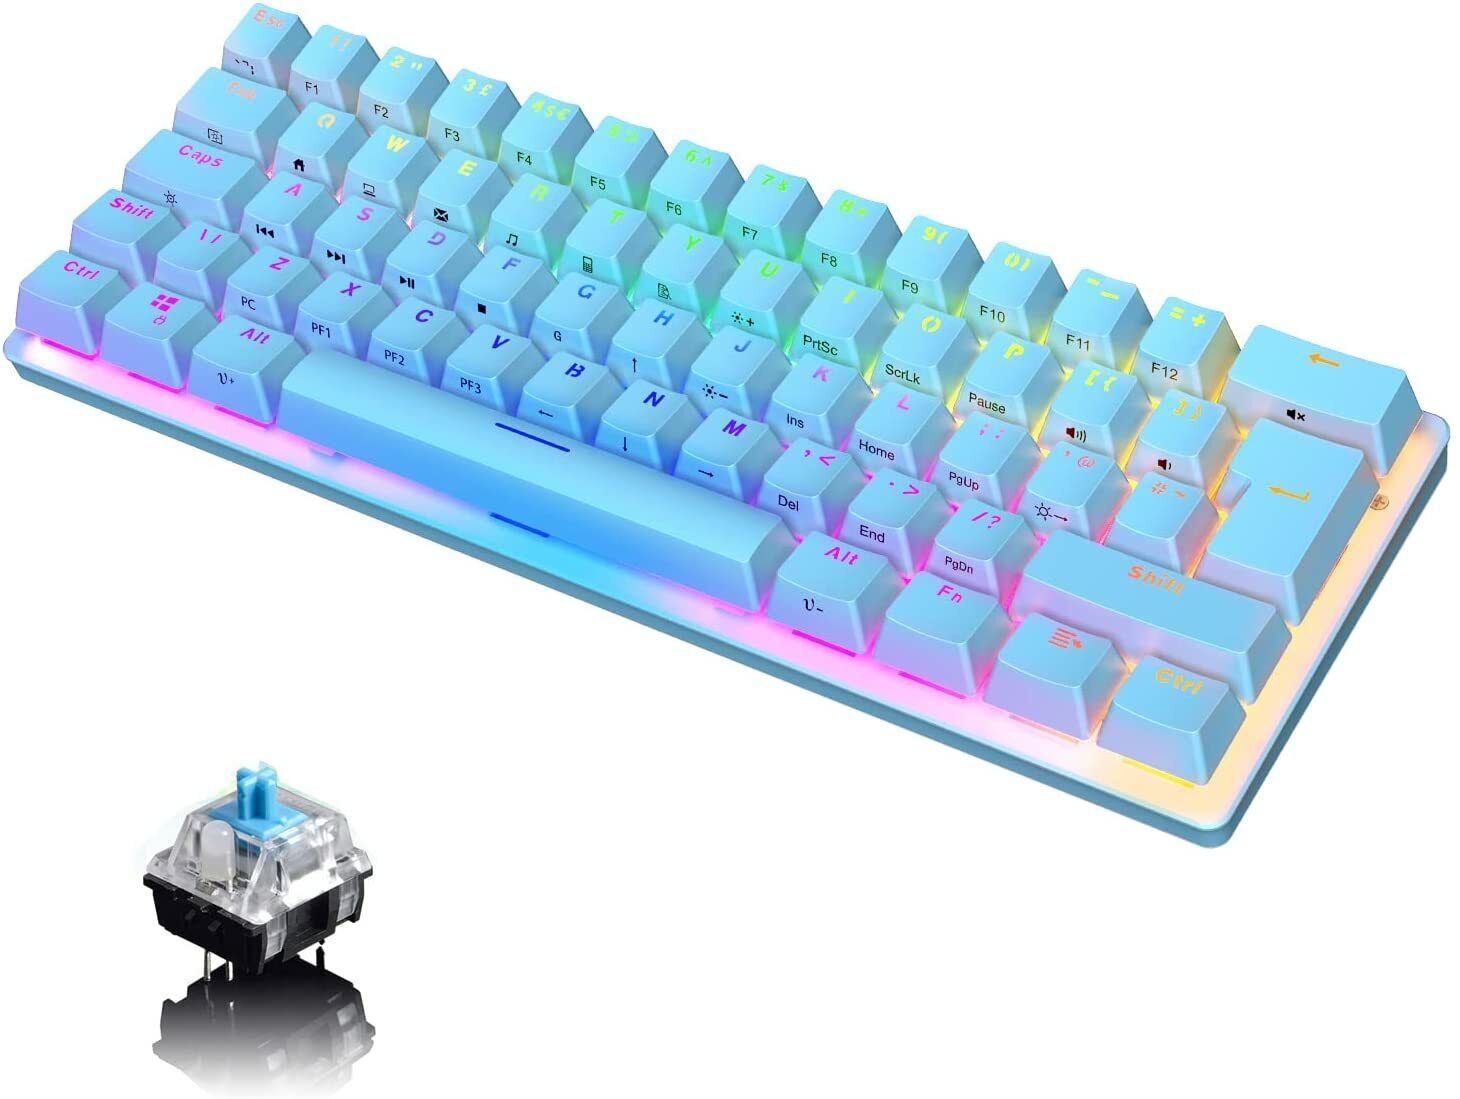 Compact 60% Mechanical Gaming Keyboard Mini RGB Backlit Type-C Wired for PC/PS4